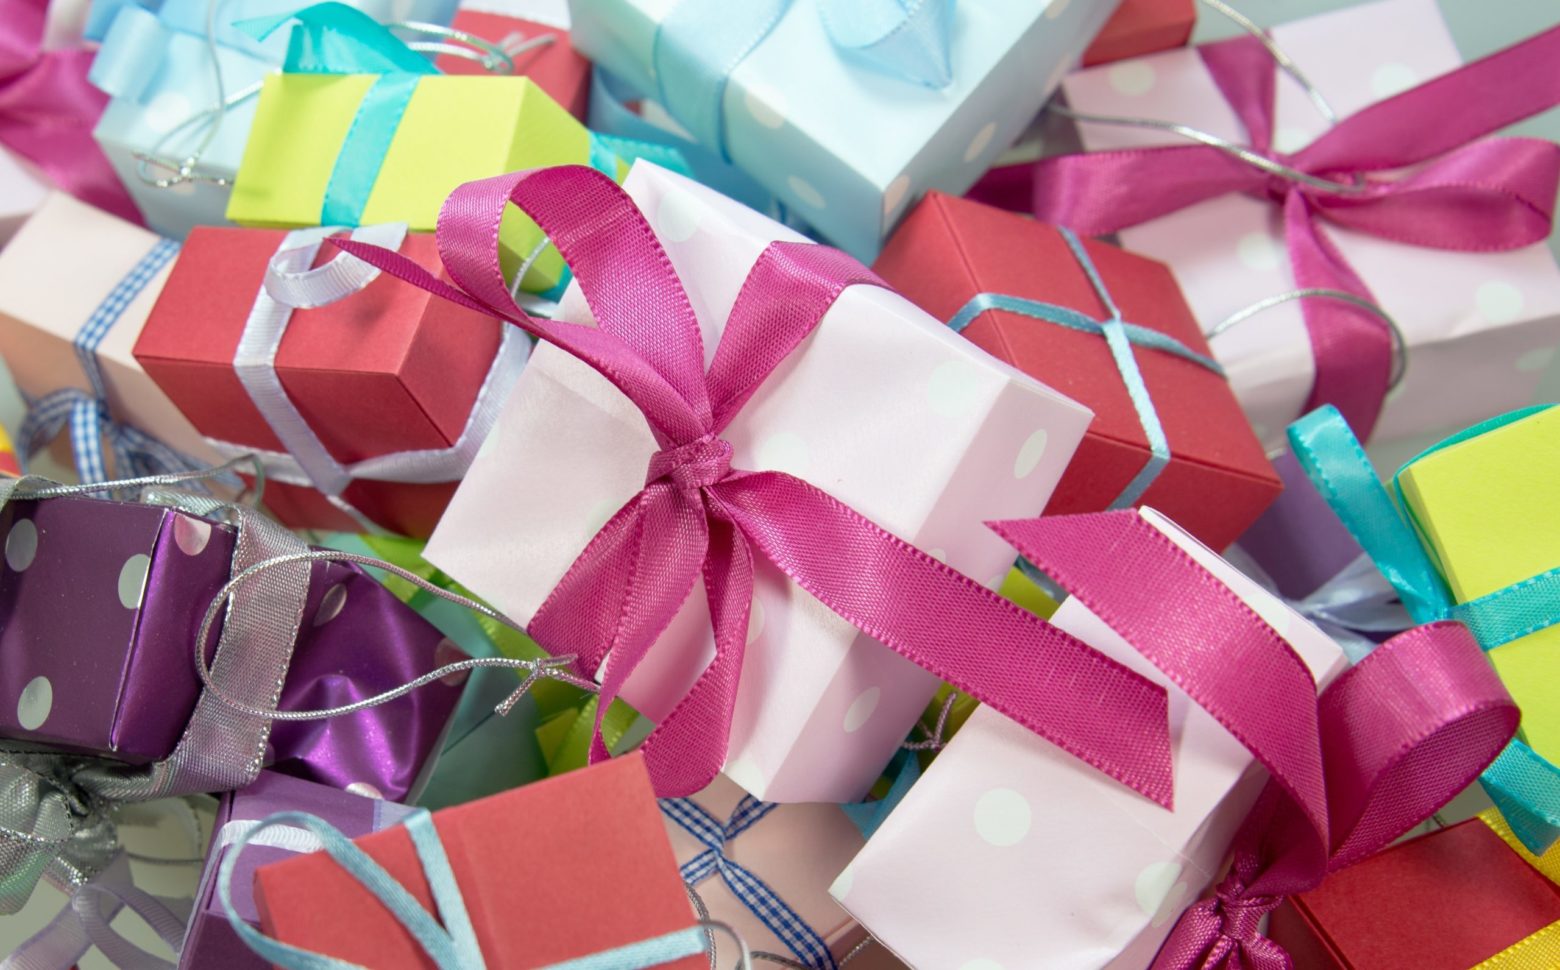 Free Beauty Products! 15 Brands That Give Free Birthday Gifts - 21Ninety